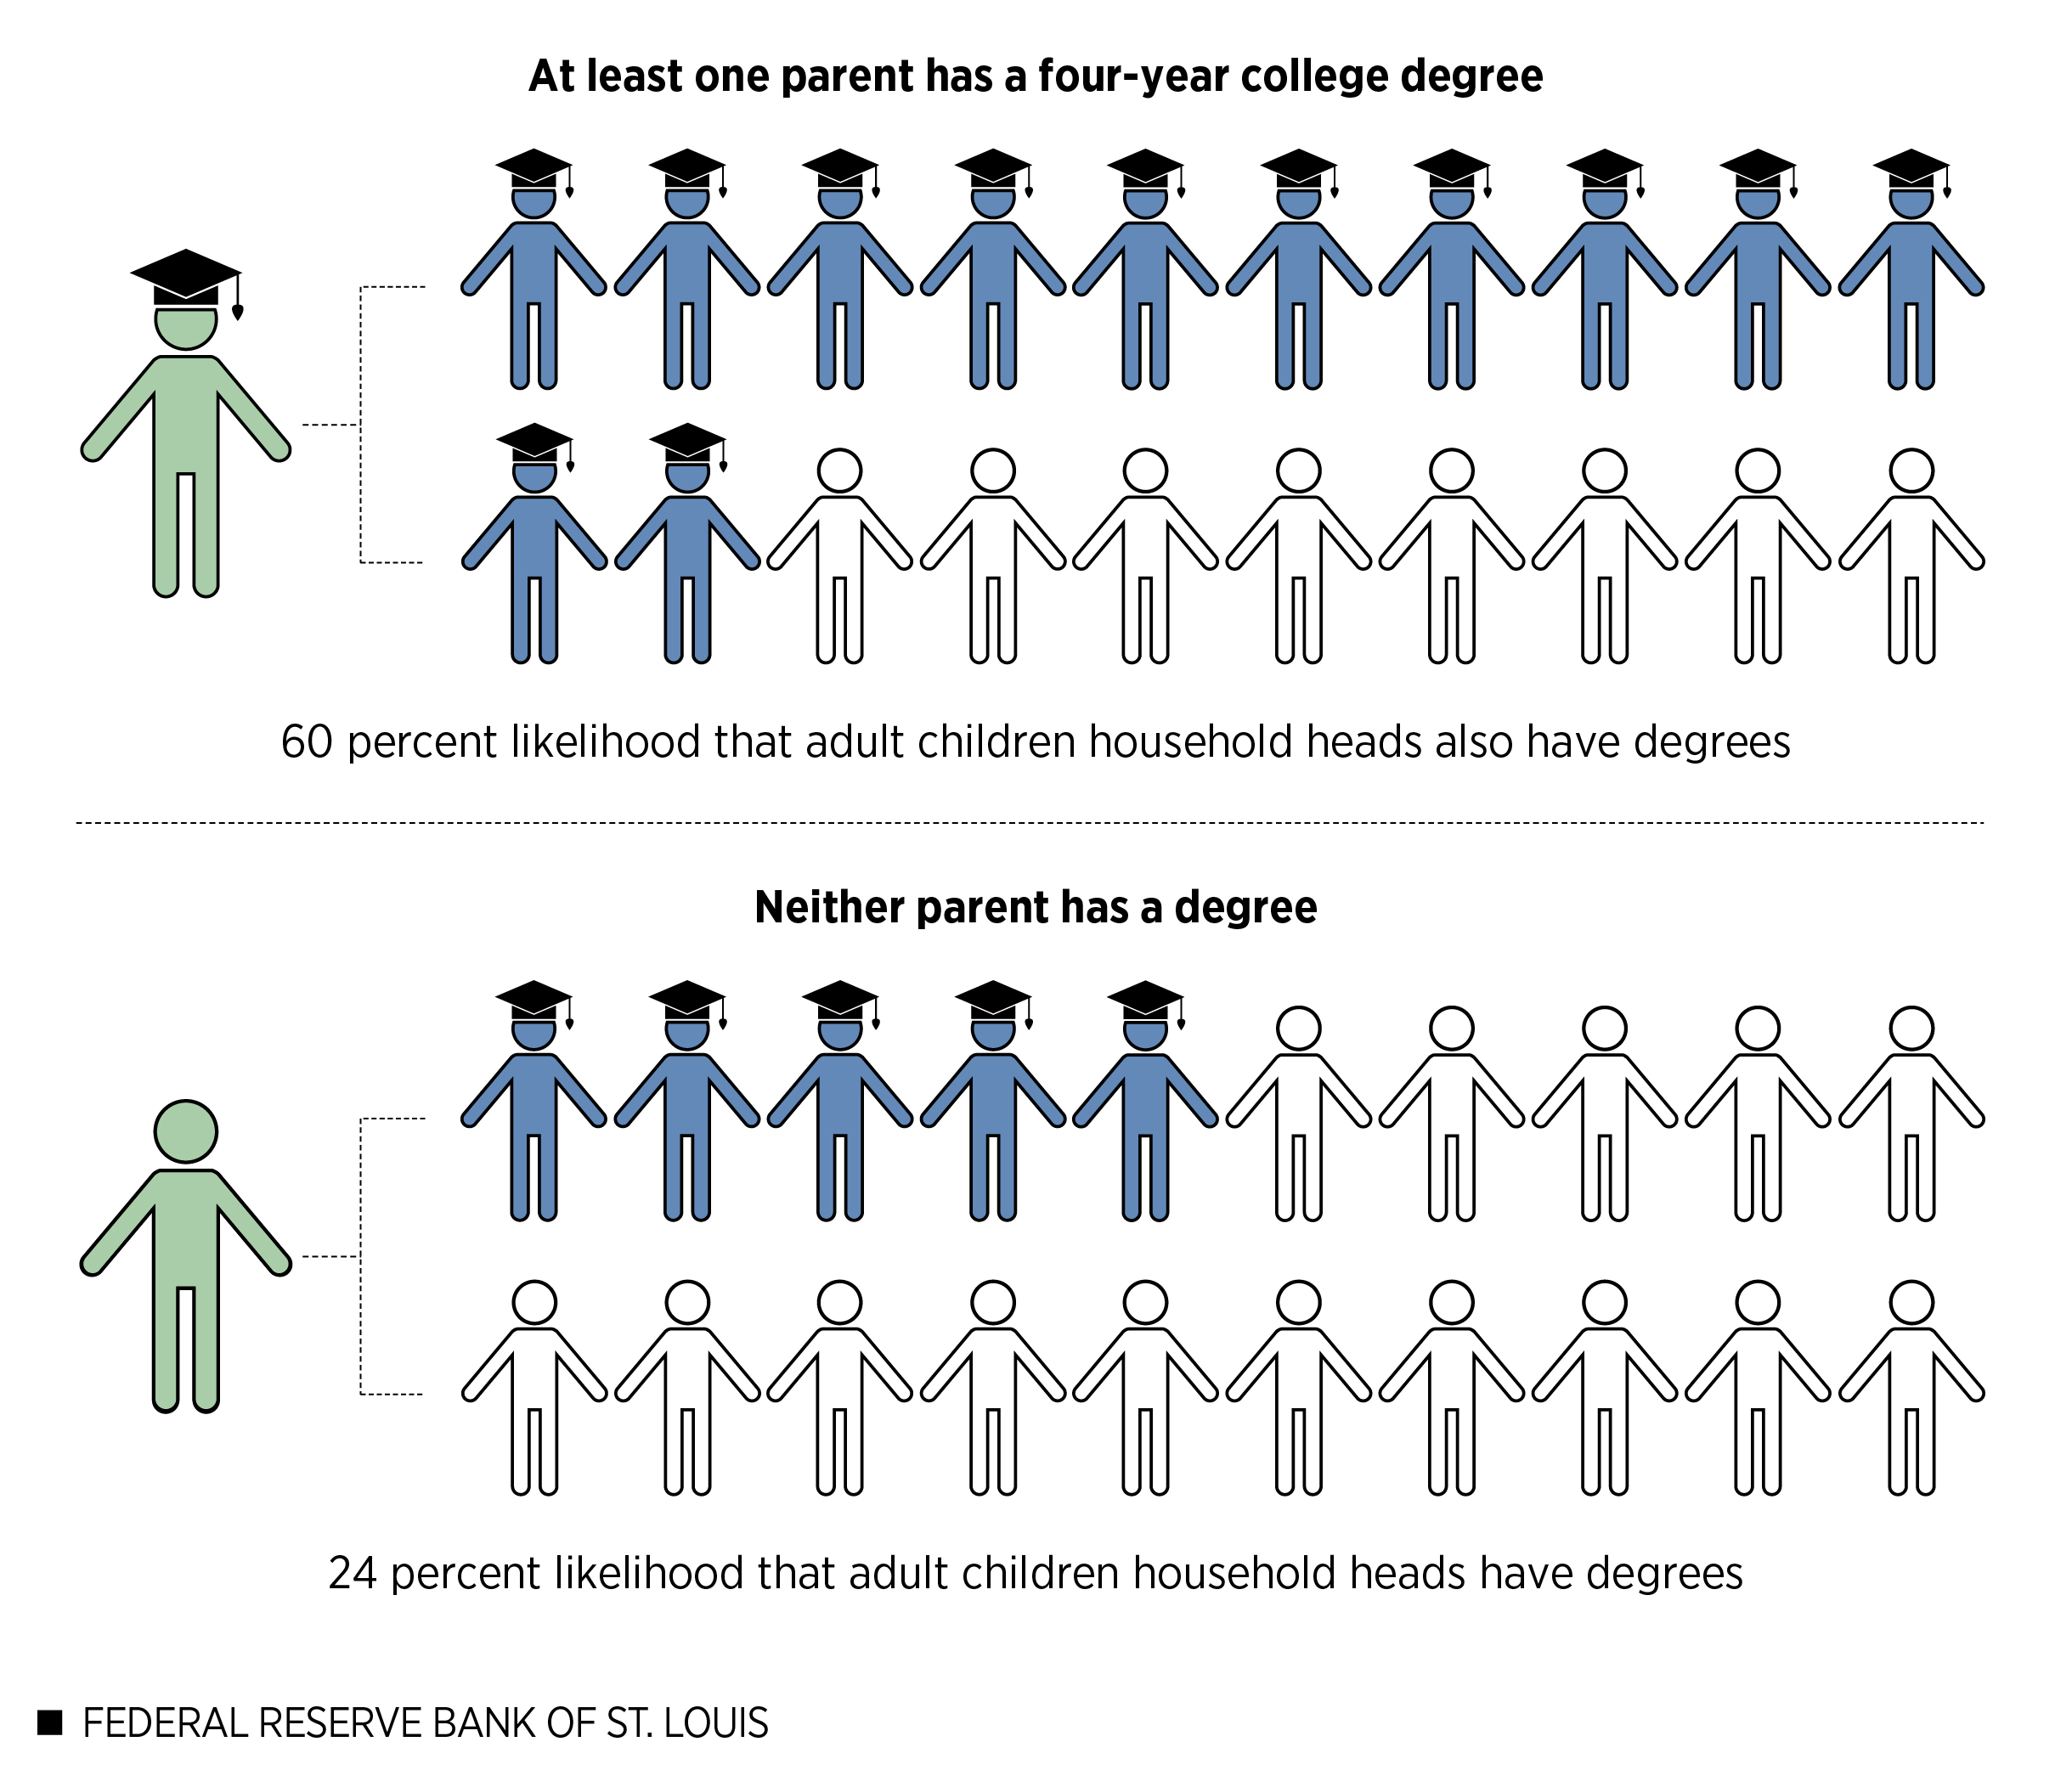 Children of College Graduate Parents also Tend to Have Degrees